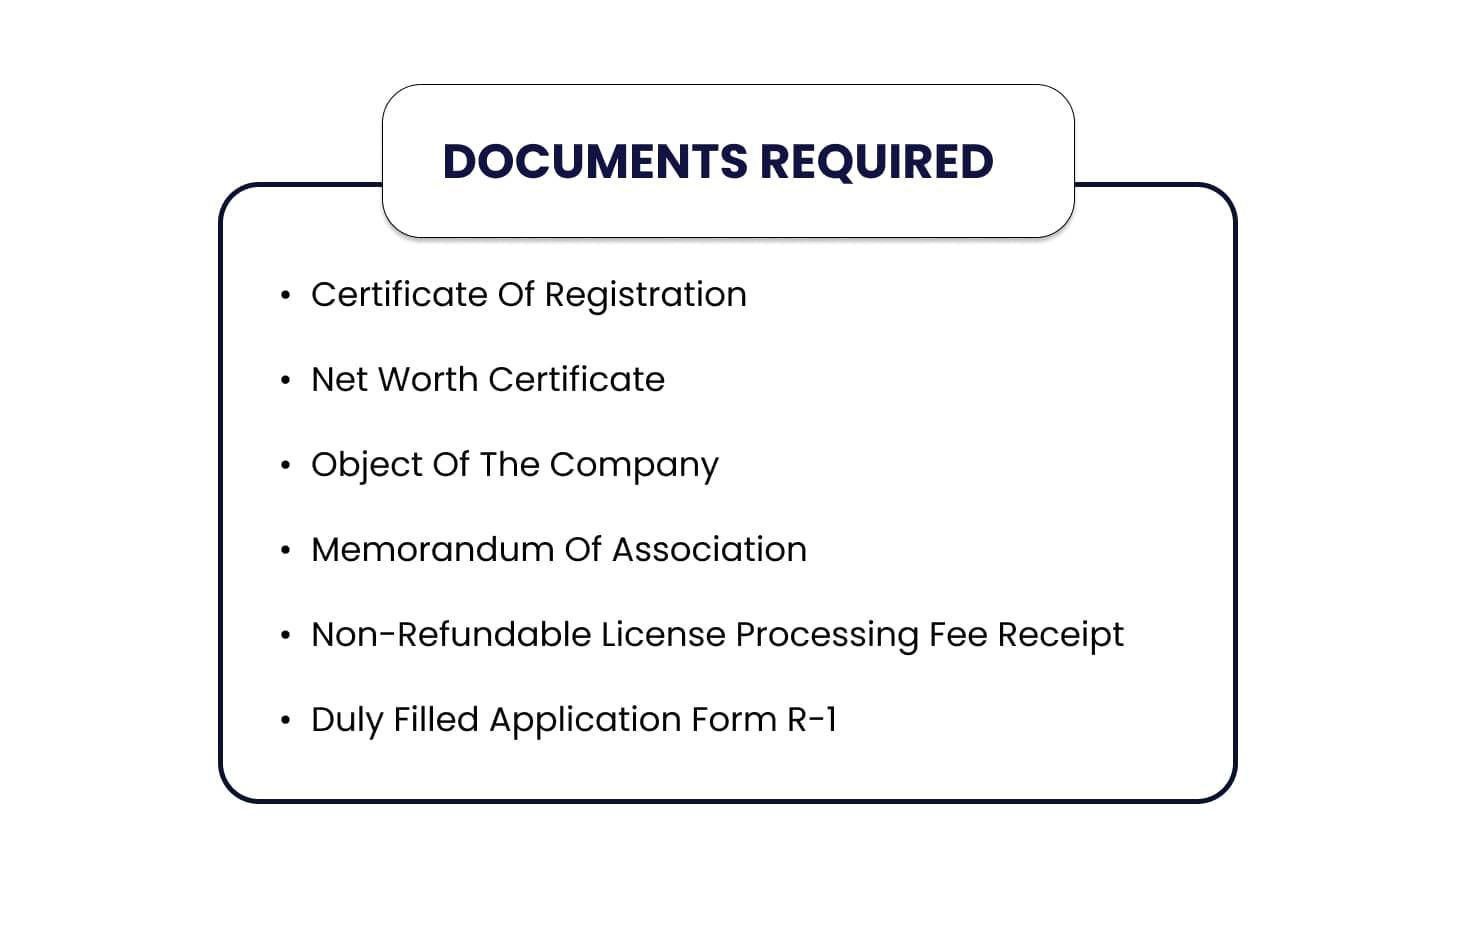 Documents Required for Insurance Repository Registration